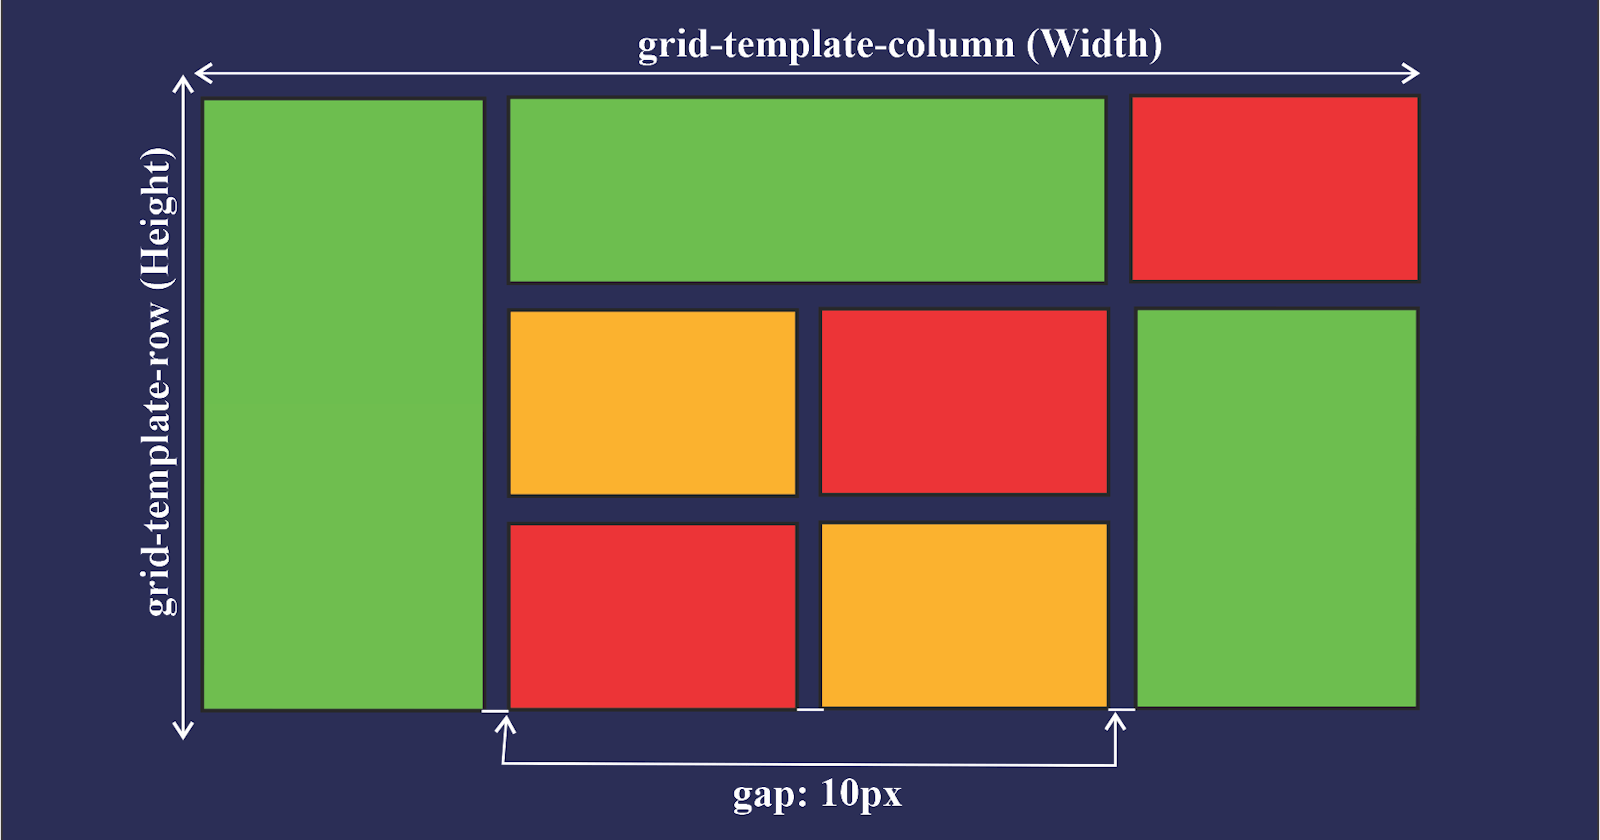 Title: Mastering CSS Grid: A Powerful Layout System for Web Design